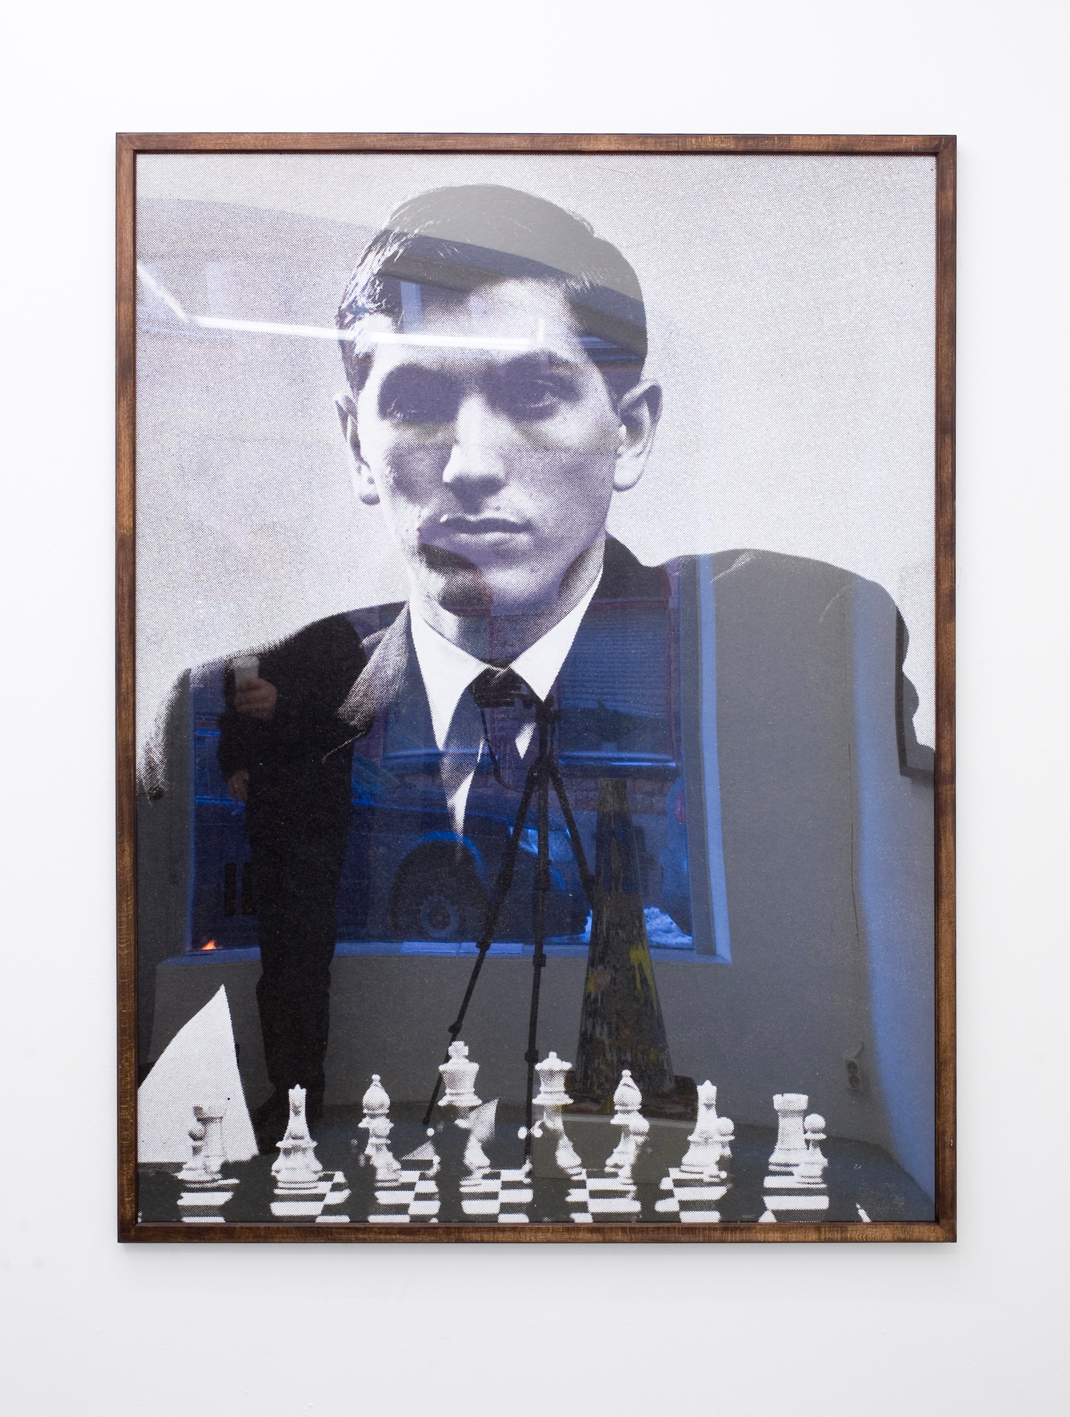 Framed photograph of a man in front of a chess board